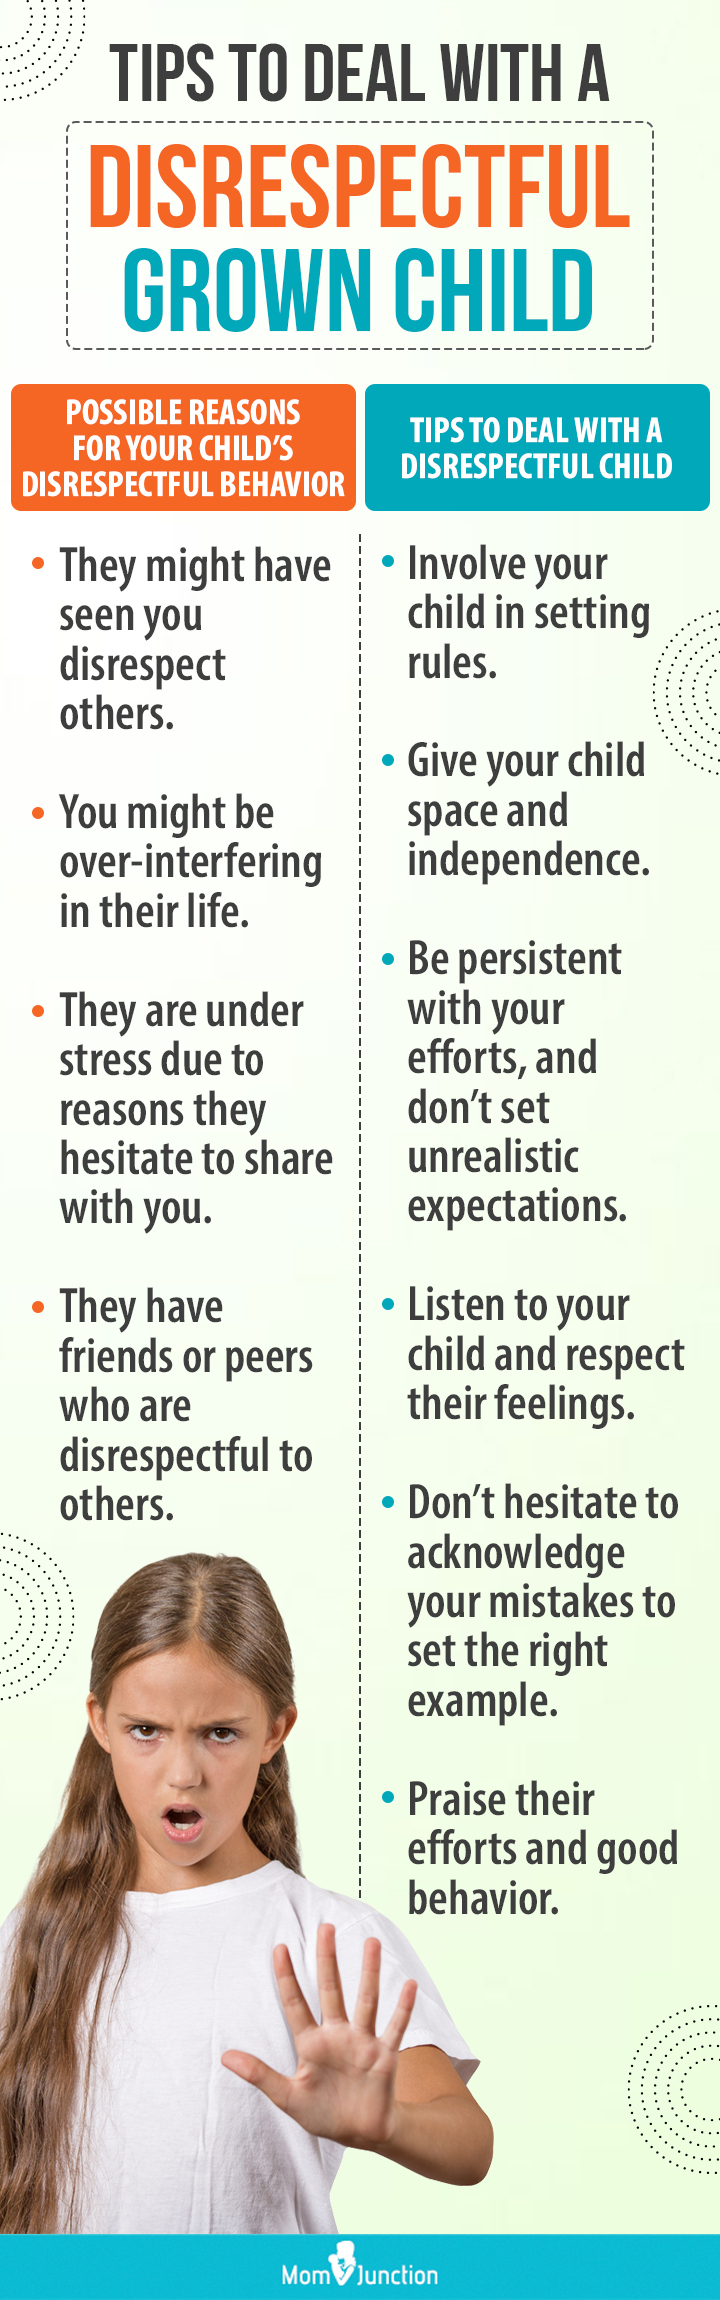 how to deal with disrespectful child (Infographic)